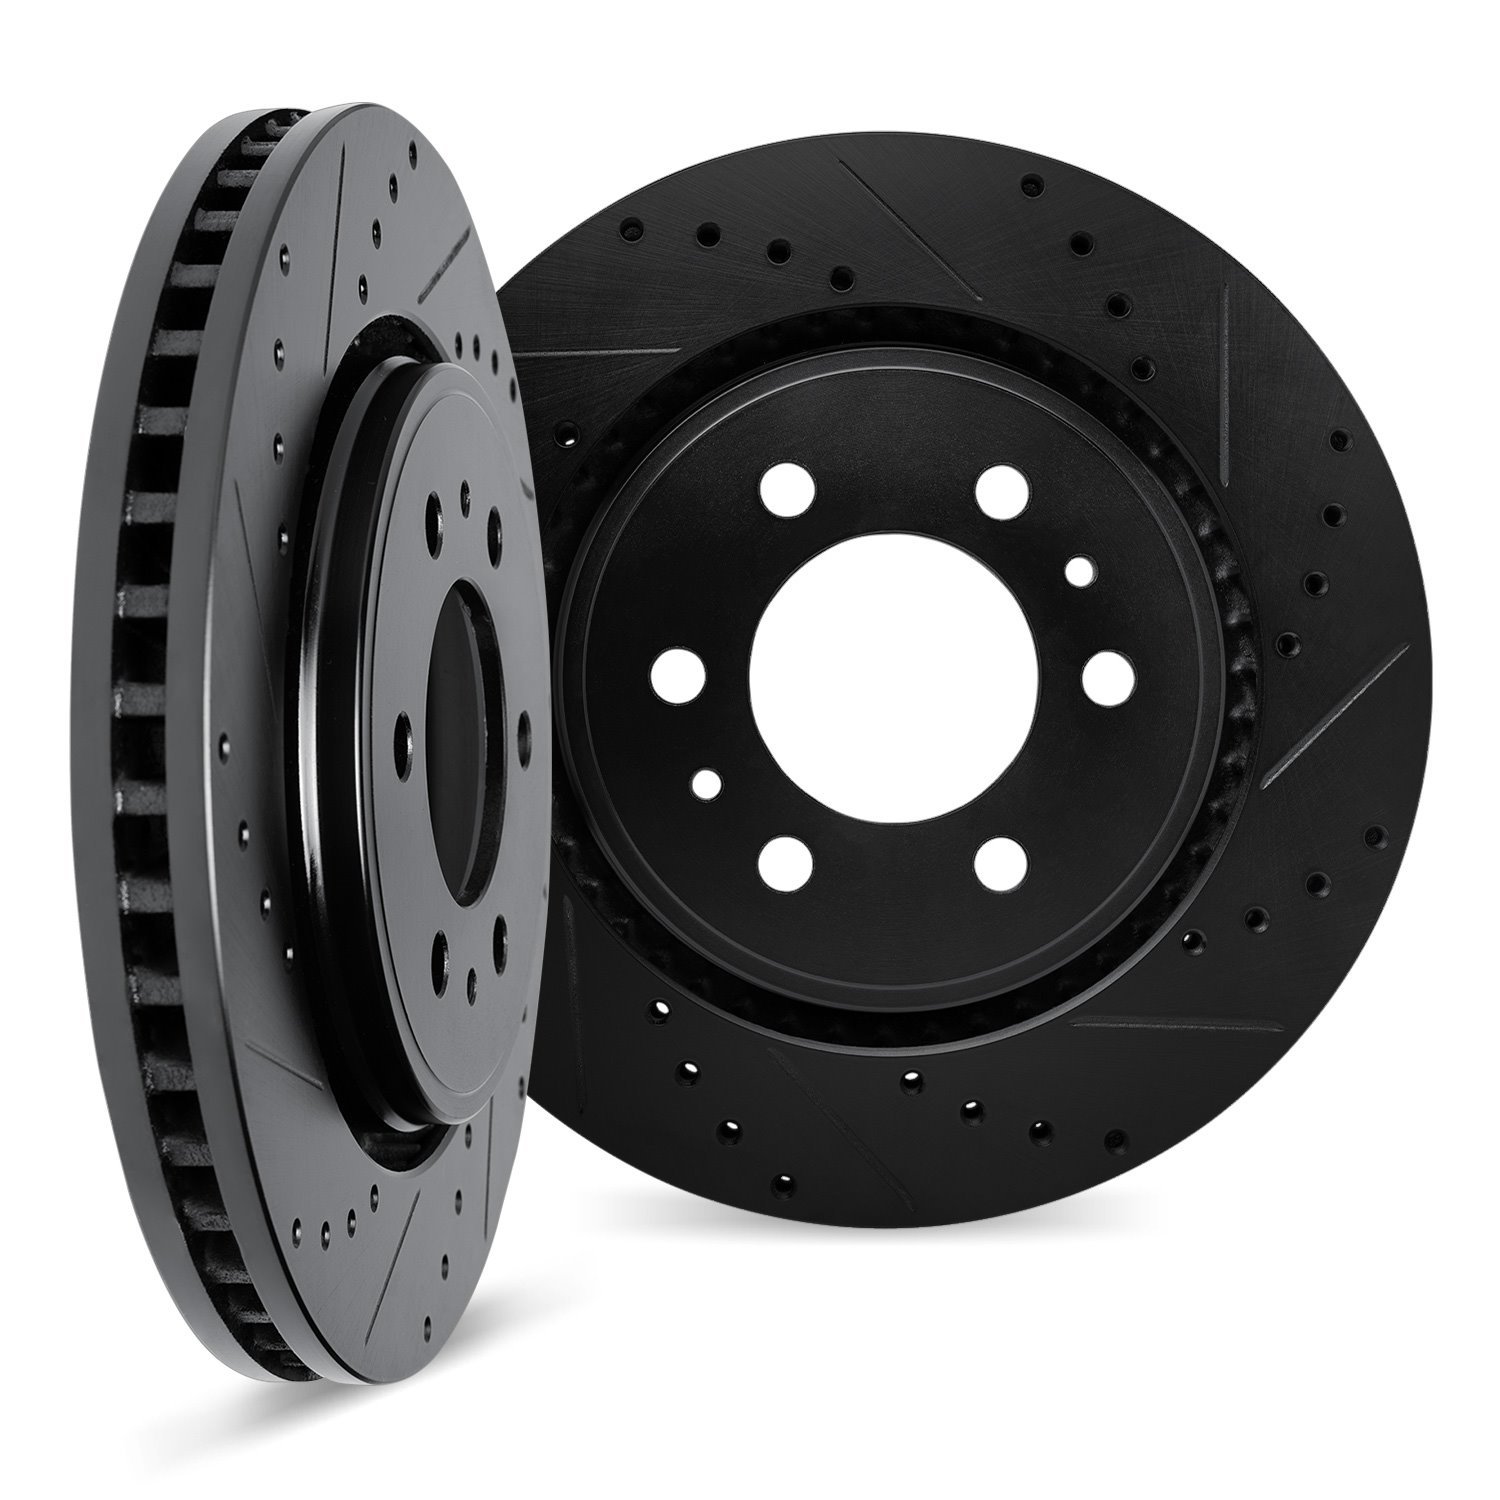 8002-76013 Drilled/Slotted Brake Rotors [Black], 2003-2009 Lexus/Toyota/Scion, Position: Front